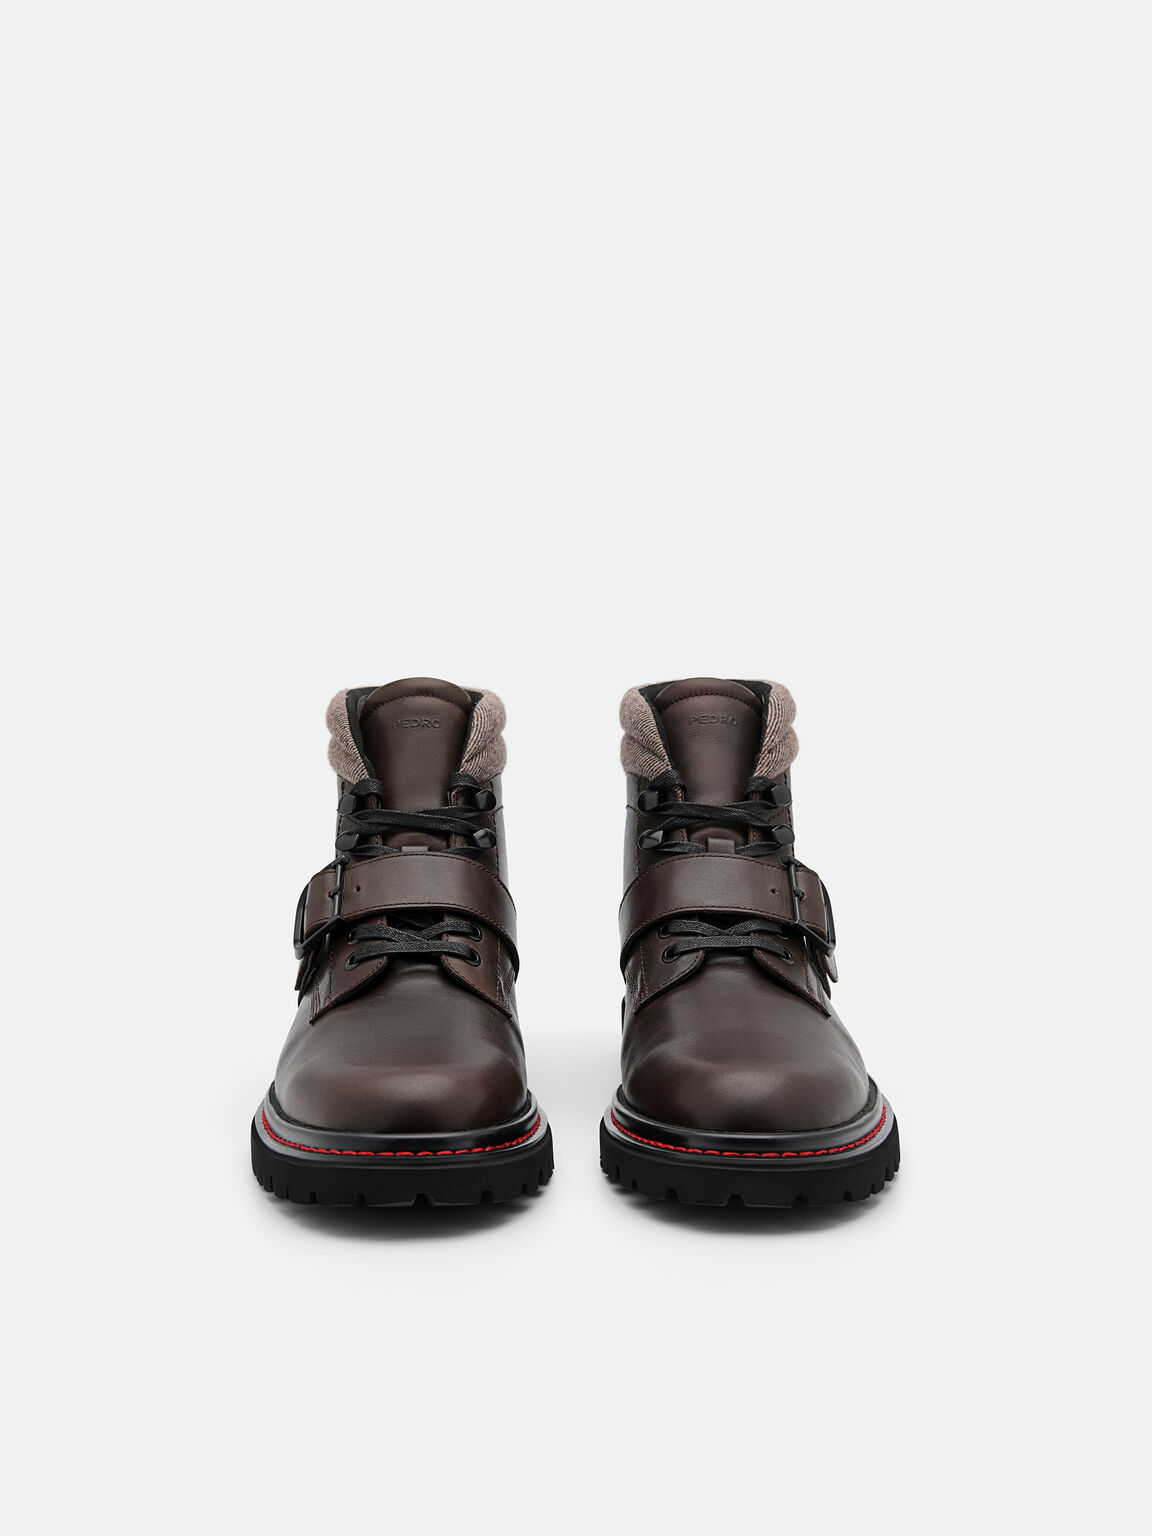 Helix Leather Boots, Dark Brown, hi-res